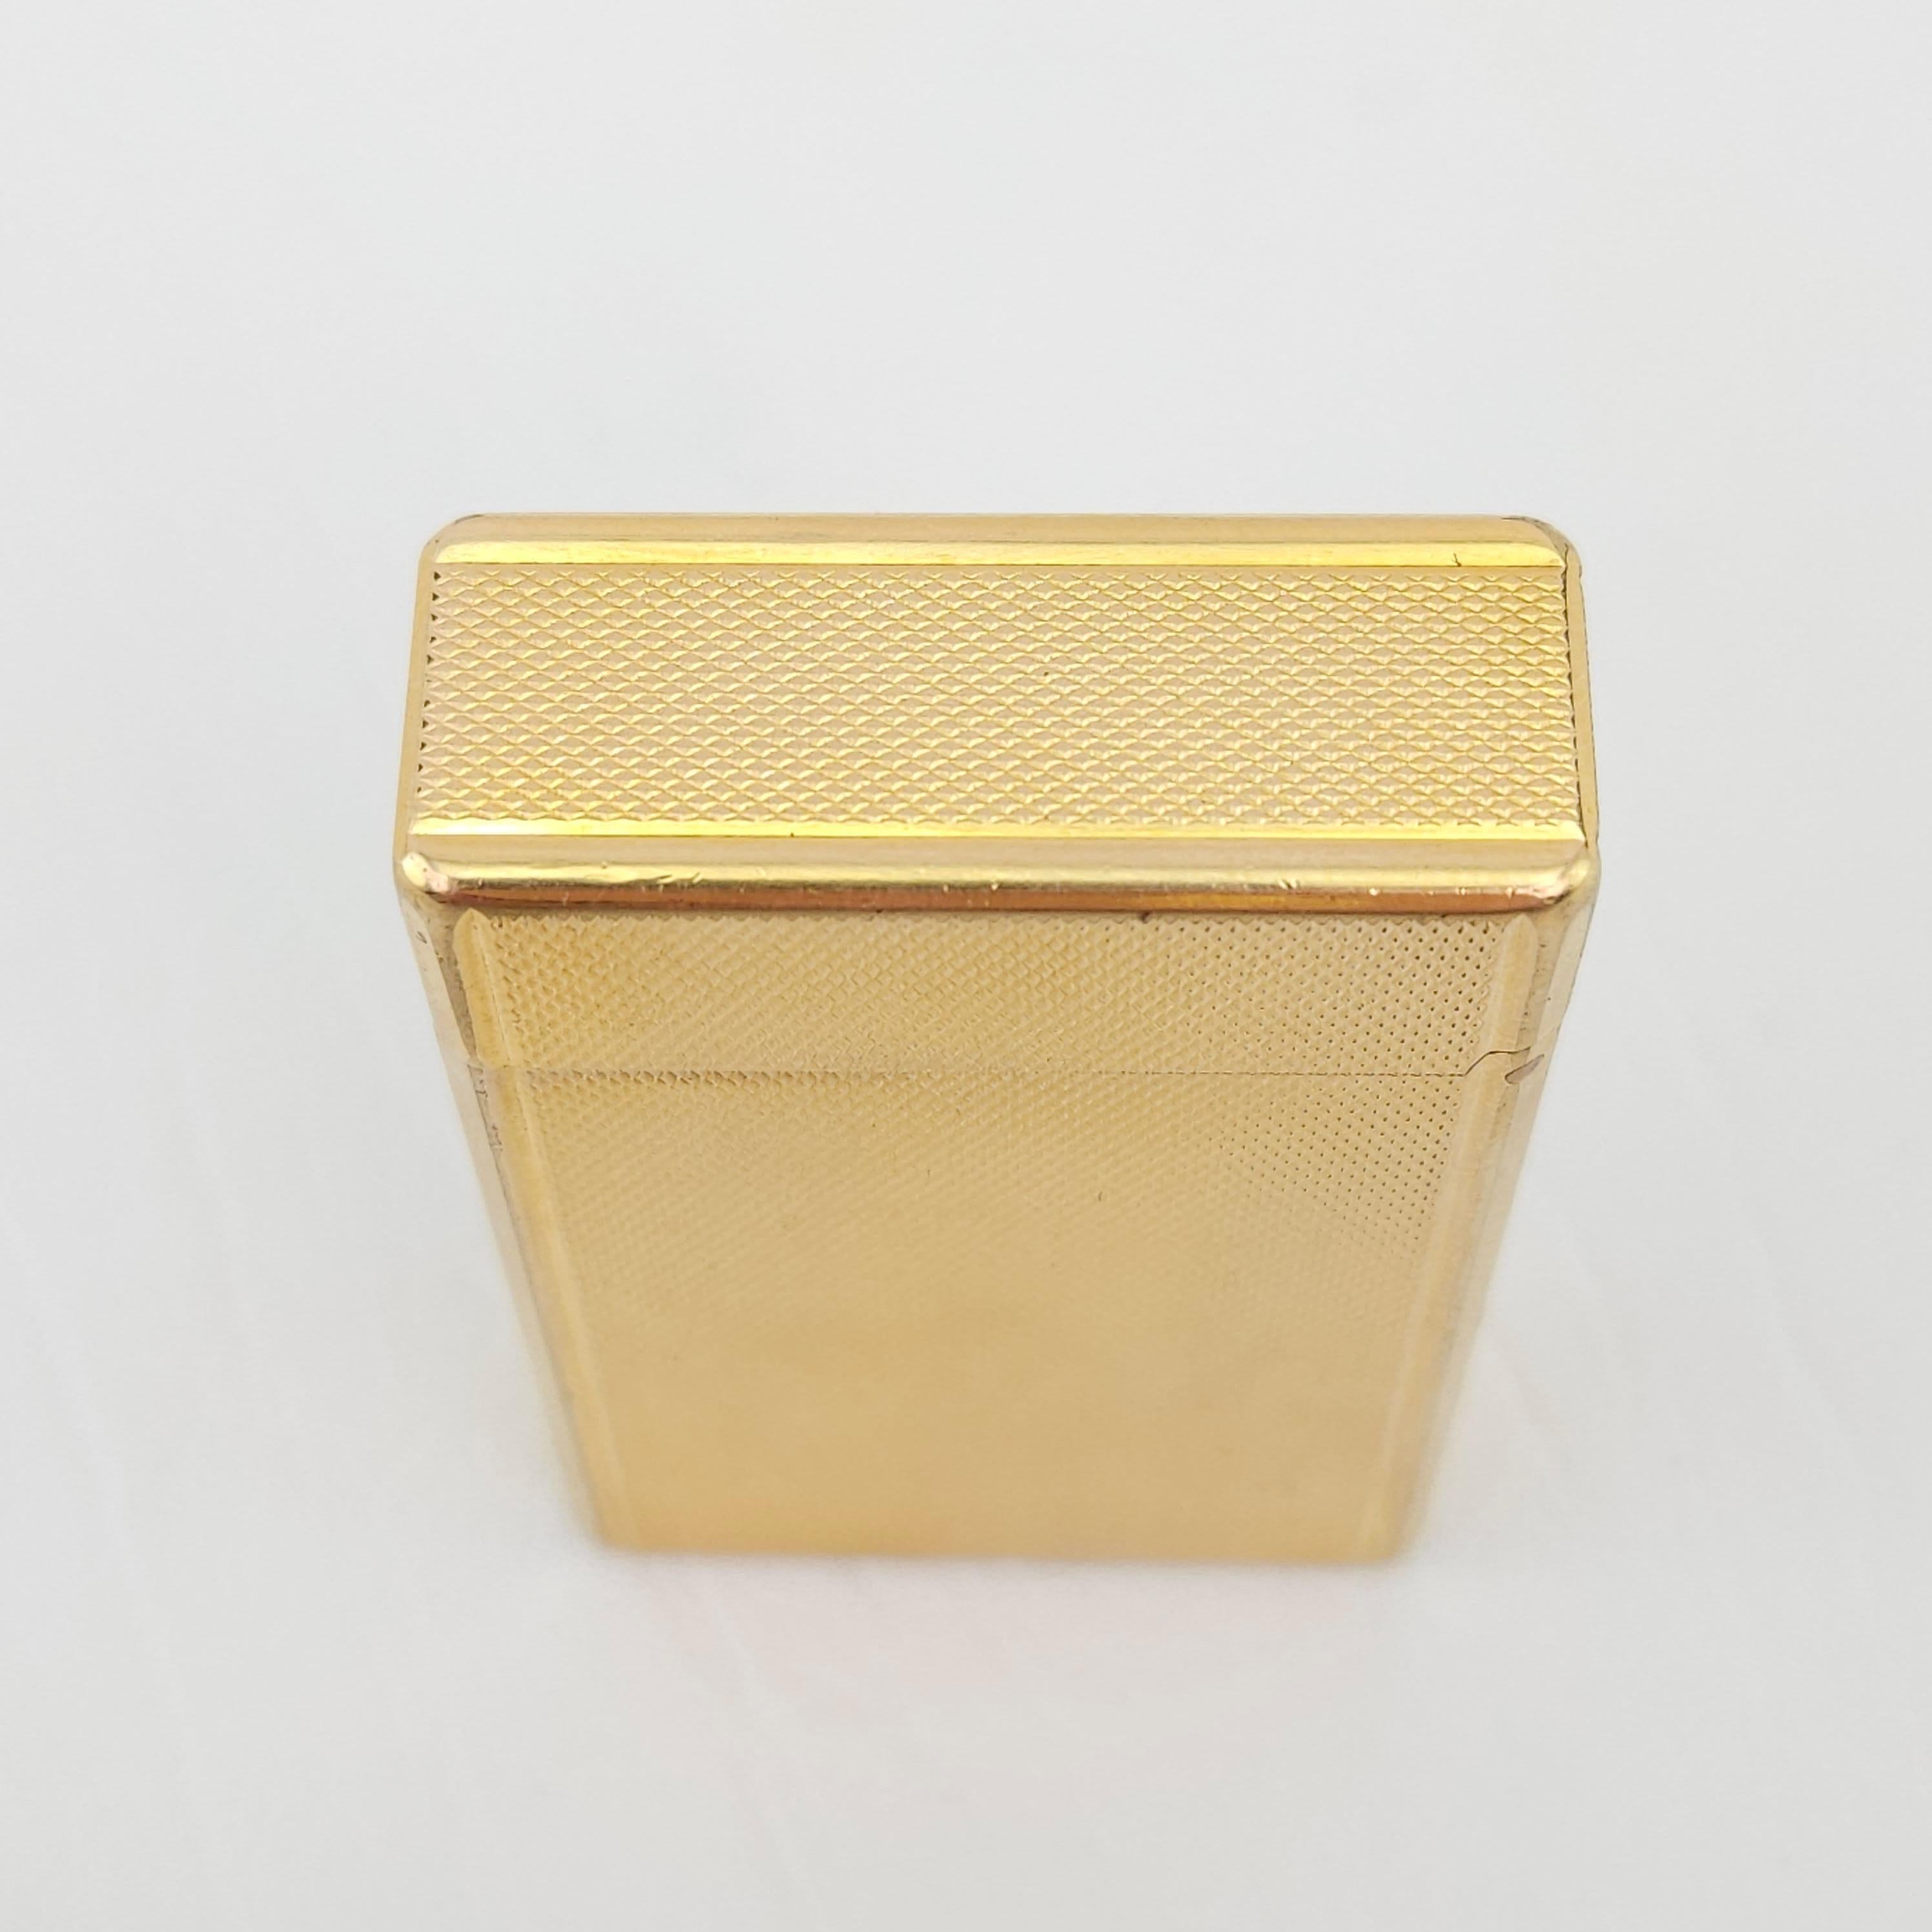 French Vintage Gold-Plated Gas Lighter By S. T. Dupont, Paris For Sale